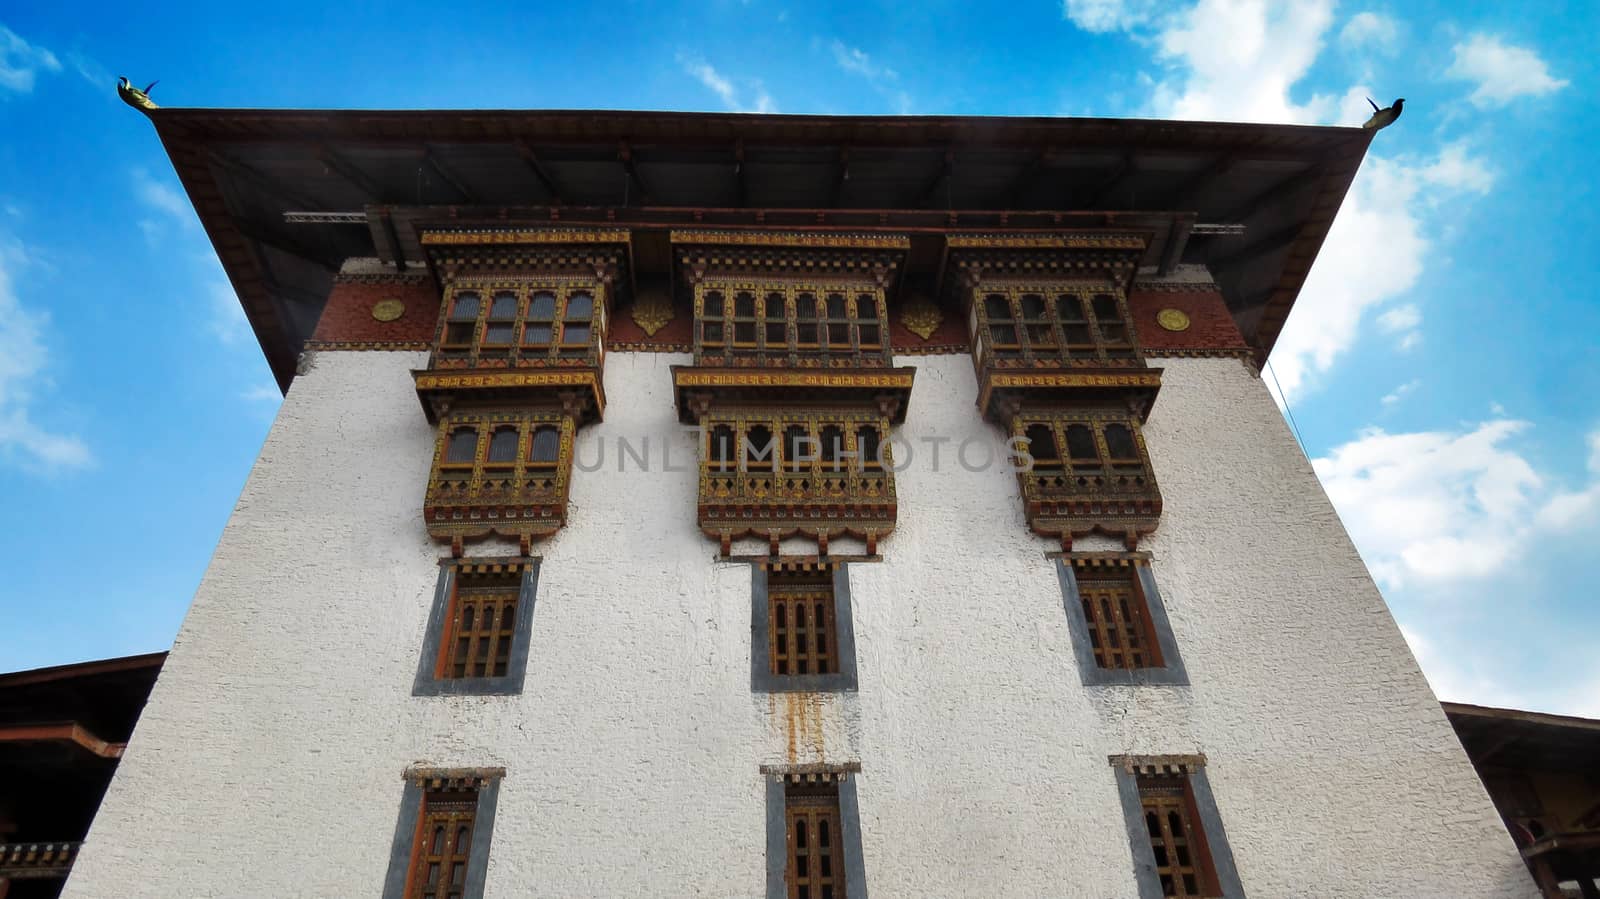 The beautiful architectural design of the dzong in Punakha, Bhutan, against blue skies.